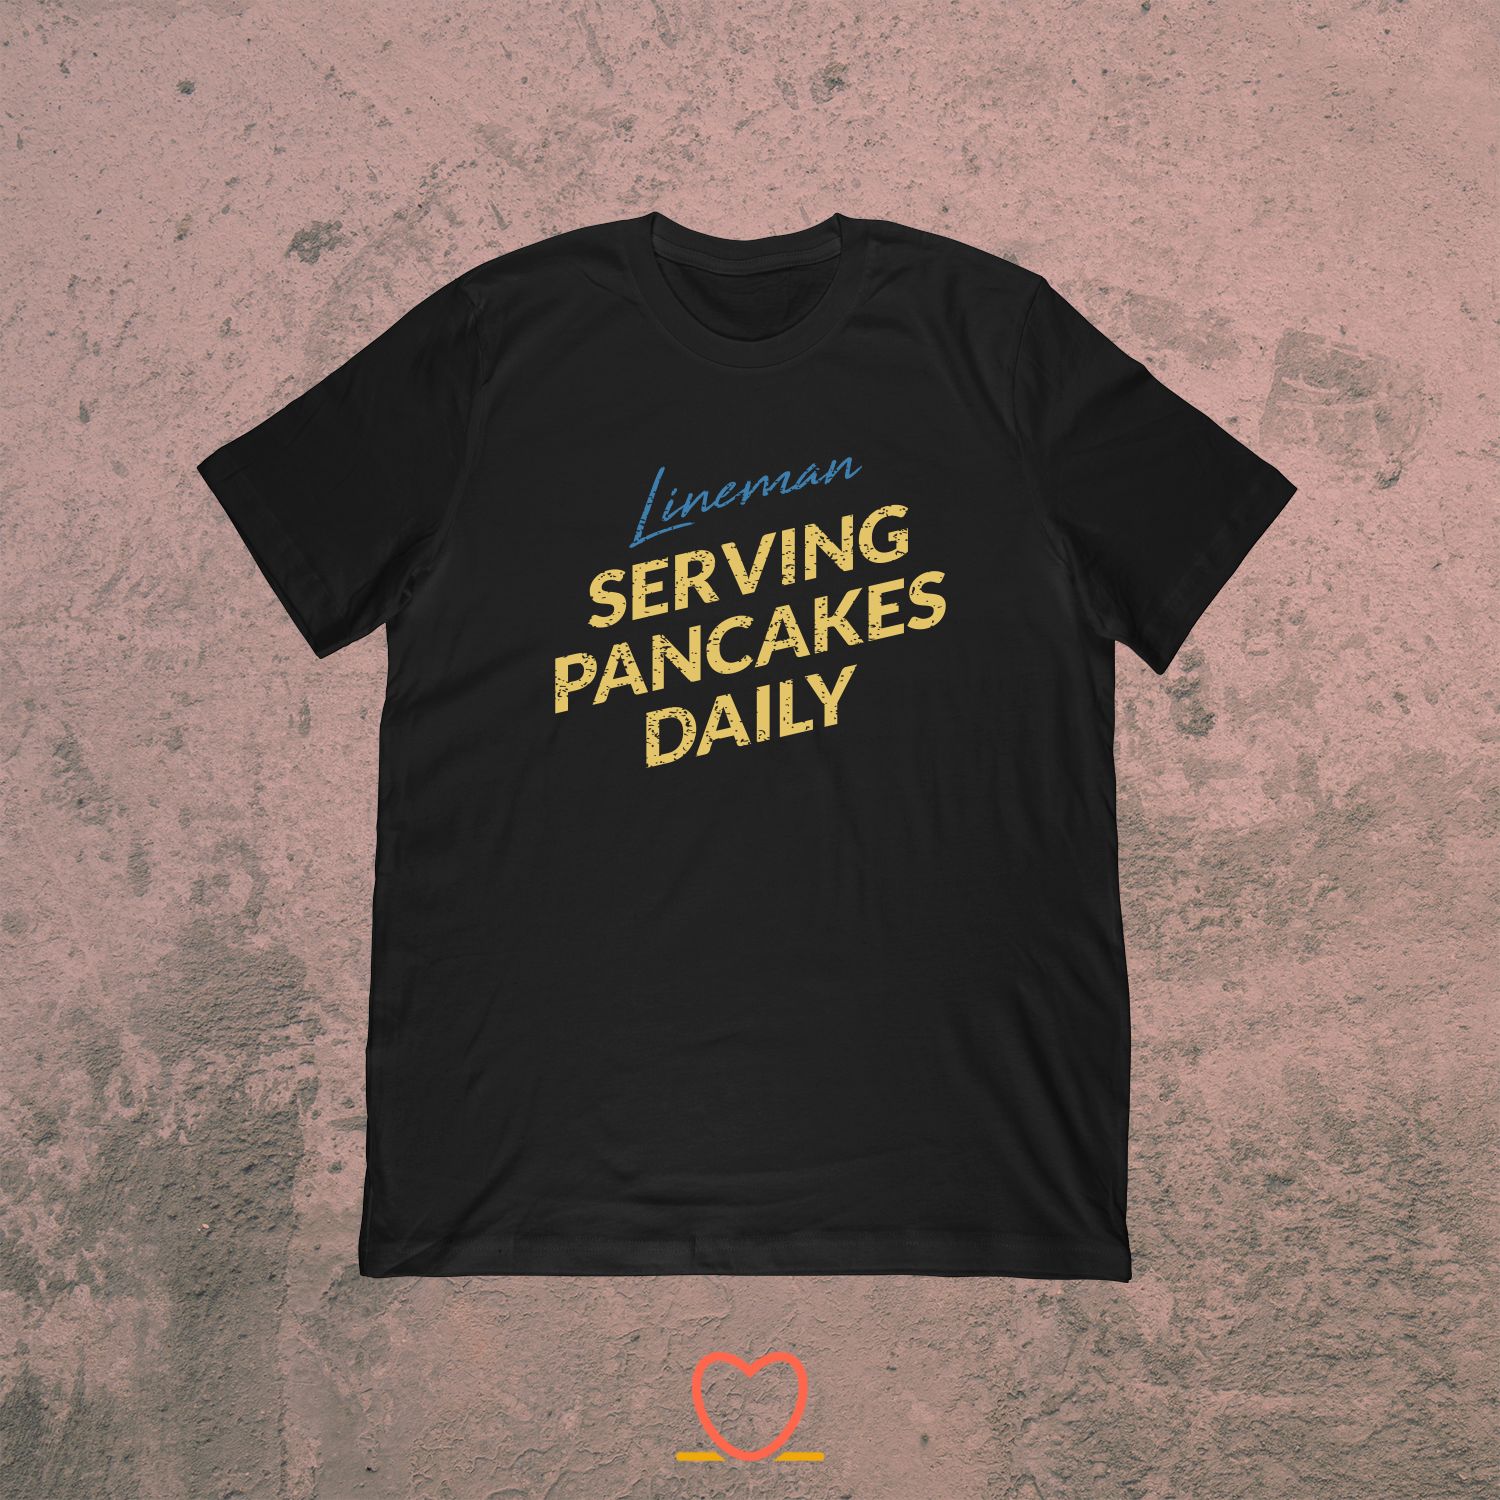 Lineman Serving Pancakes Daily – Funny US Football Tee